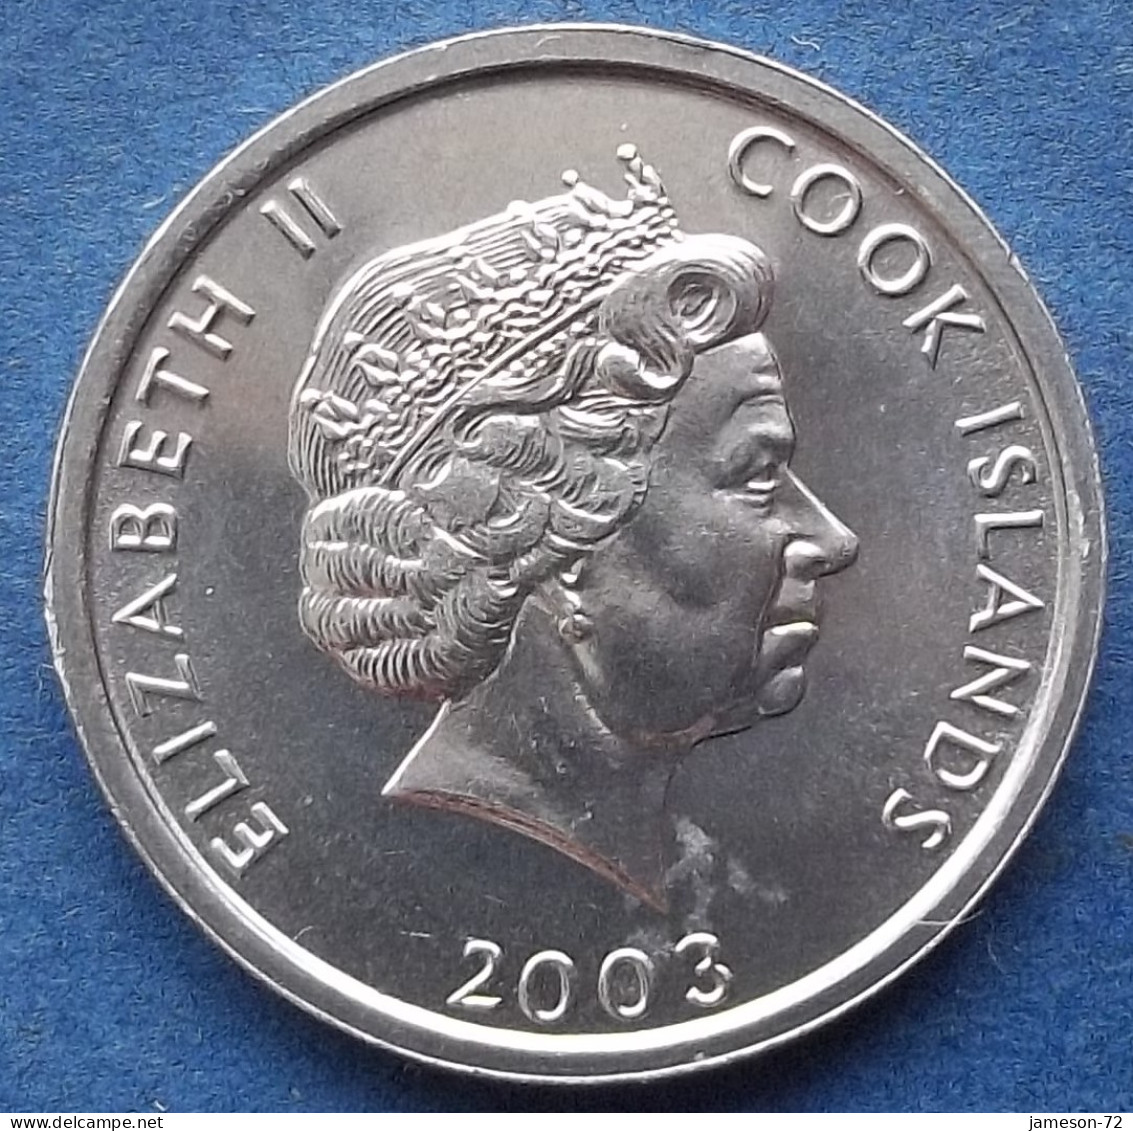 COOK ISLANDS - 1 Cent 2003 "Collie Dog" KM# 420 Dependency Of New Zealand Elizabeth II - Edelweiss Coins - Cook